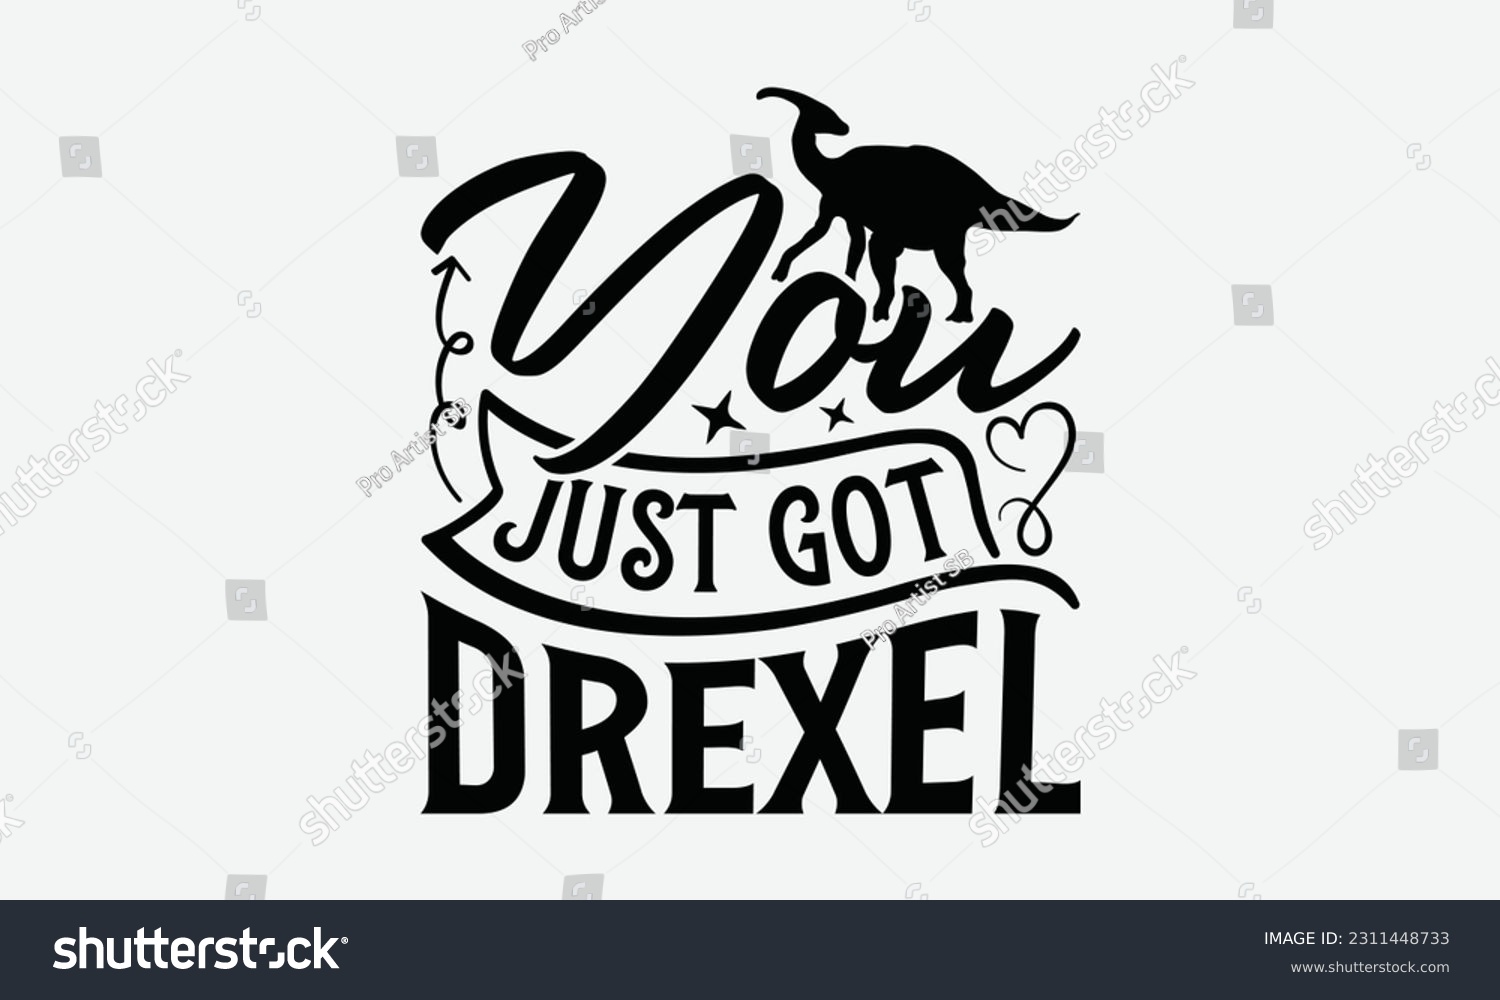 SVG of You Just Got Drexel - Dinosaur SVG Design, Handmade Calligraphy Vector Illustration, Greeting Card Template With Typography Text. svg